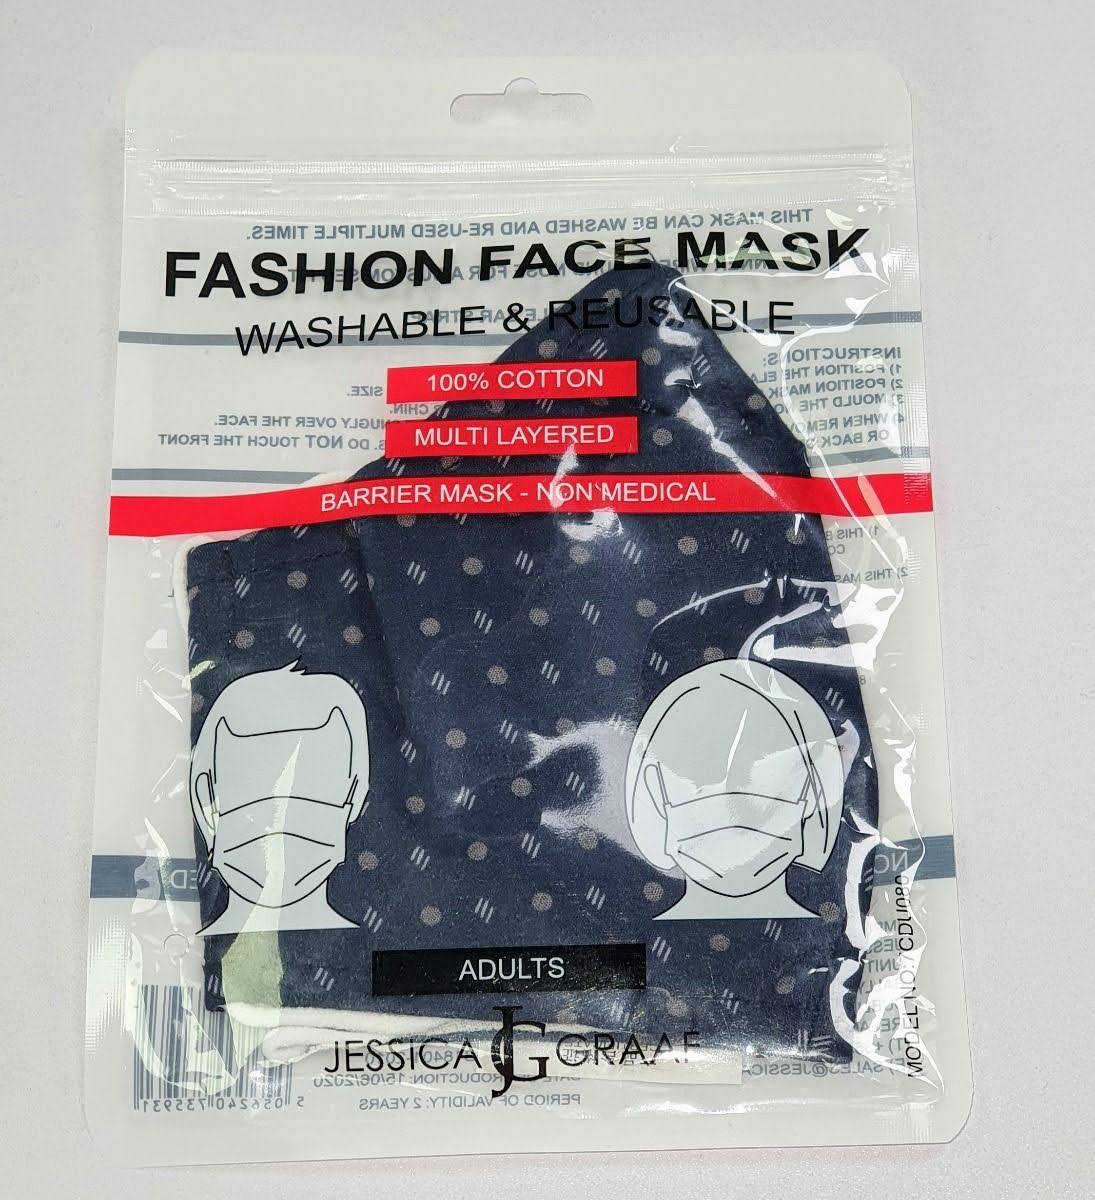 Reusable and Washable Face Mask Adult - Jessica Graaf- GB18401-2010